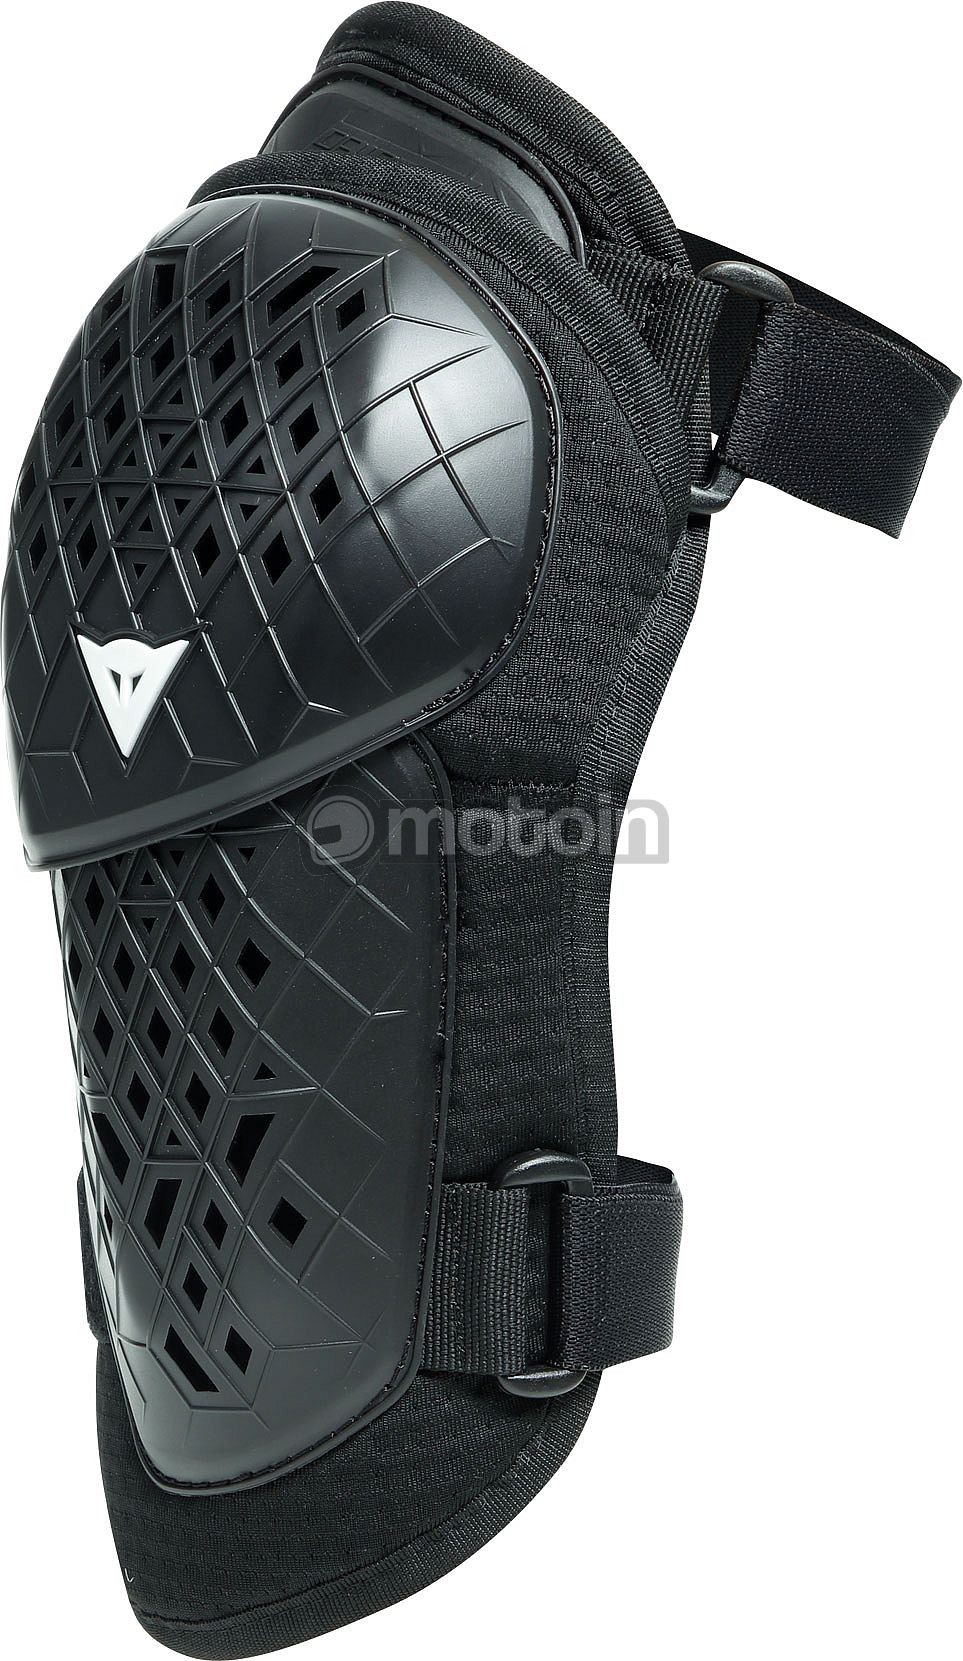 Dainese Rival R, elbow protectors